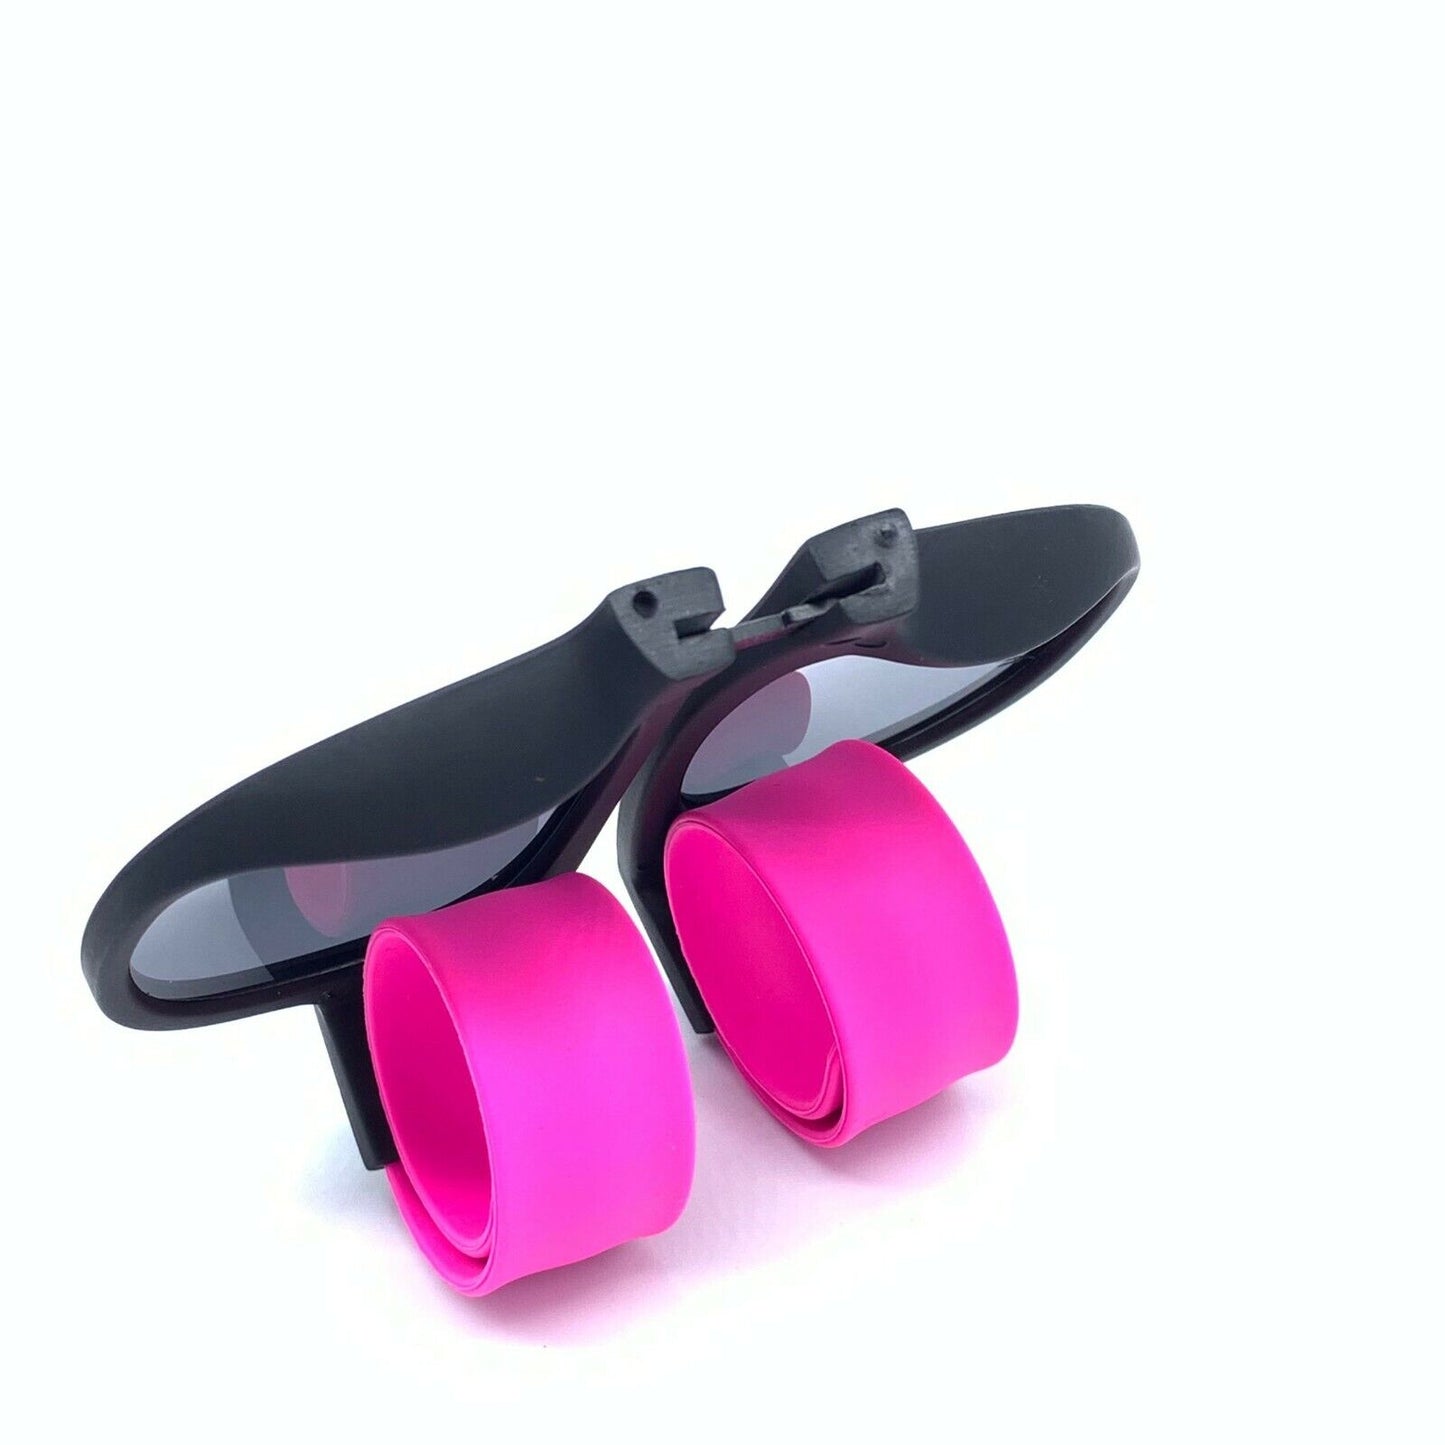 Display x24 Sunglasses & Wristband in One Foldable Clap & Go Foldable Stylish Shades